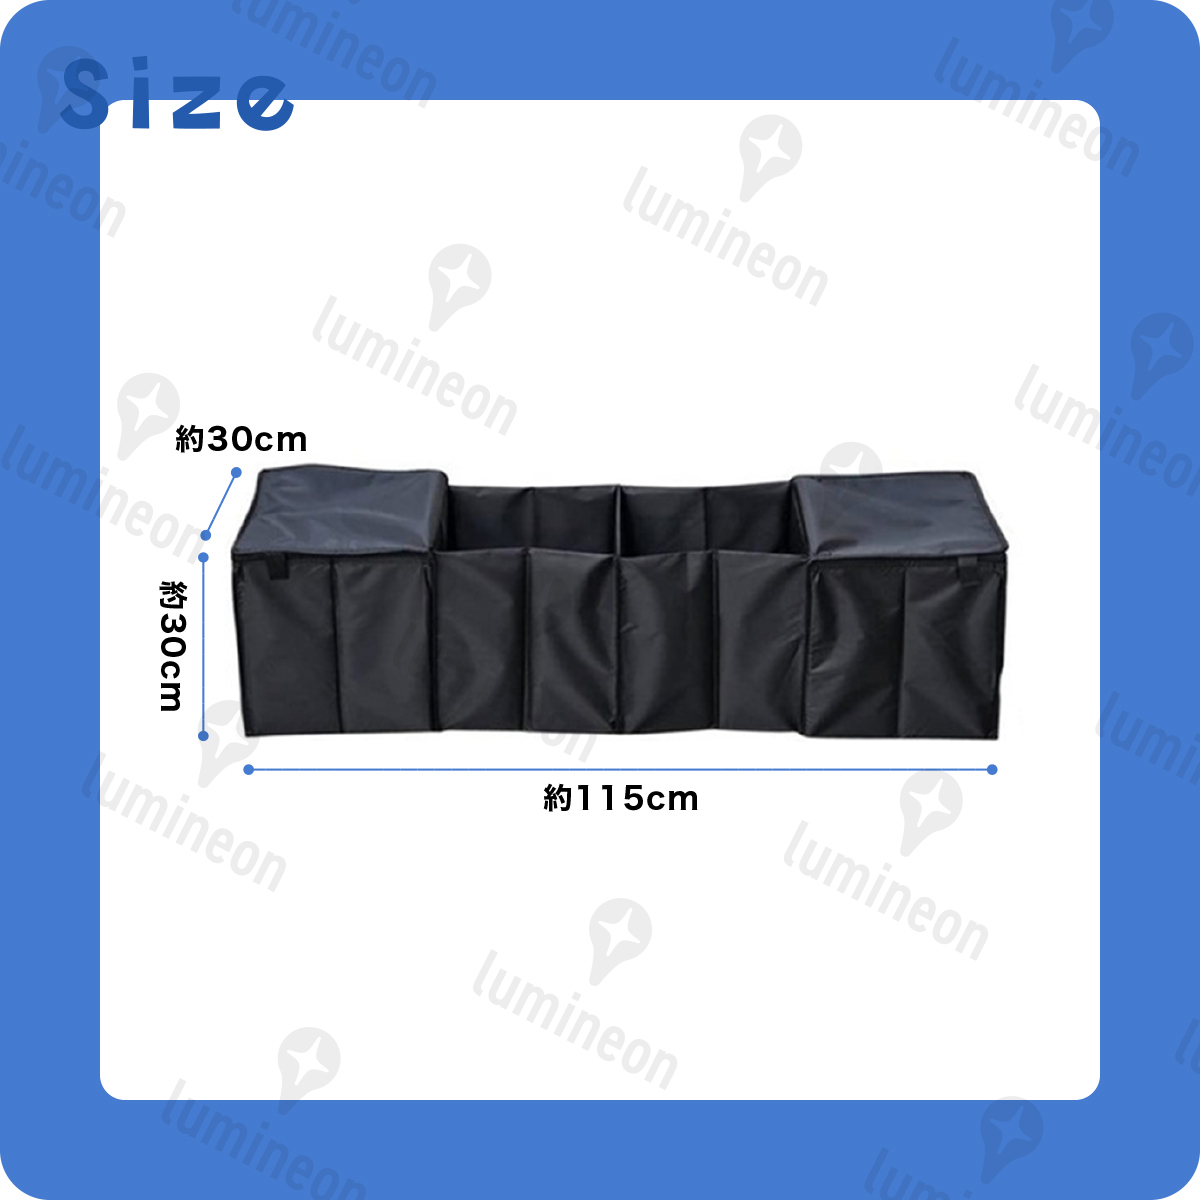  car storage box cover attaching heat insulation keep cool folding travel trunk pocket luggage inserting fixation bag luggage room sleeping area in the vehicle high capacity g187a 3